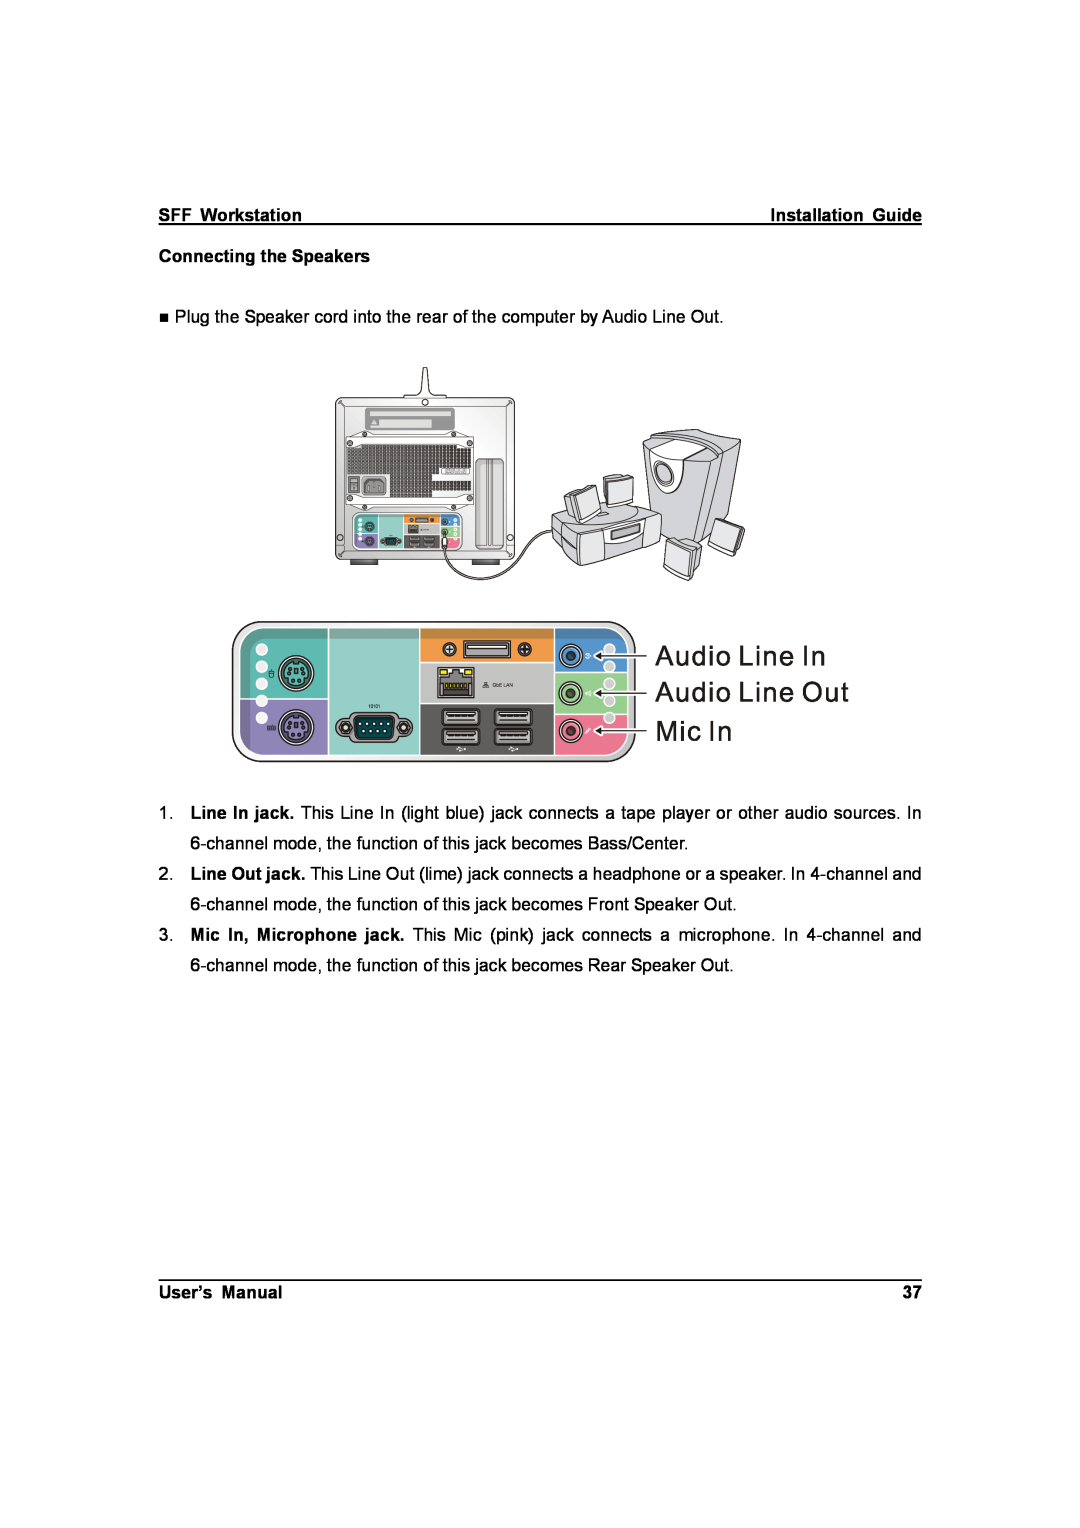 IBM ZMAXdp user manual SFF Workstation, Connecting the Speakers, User’s Manual 